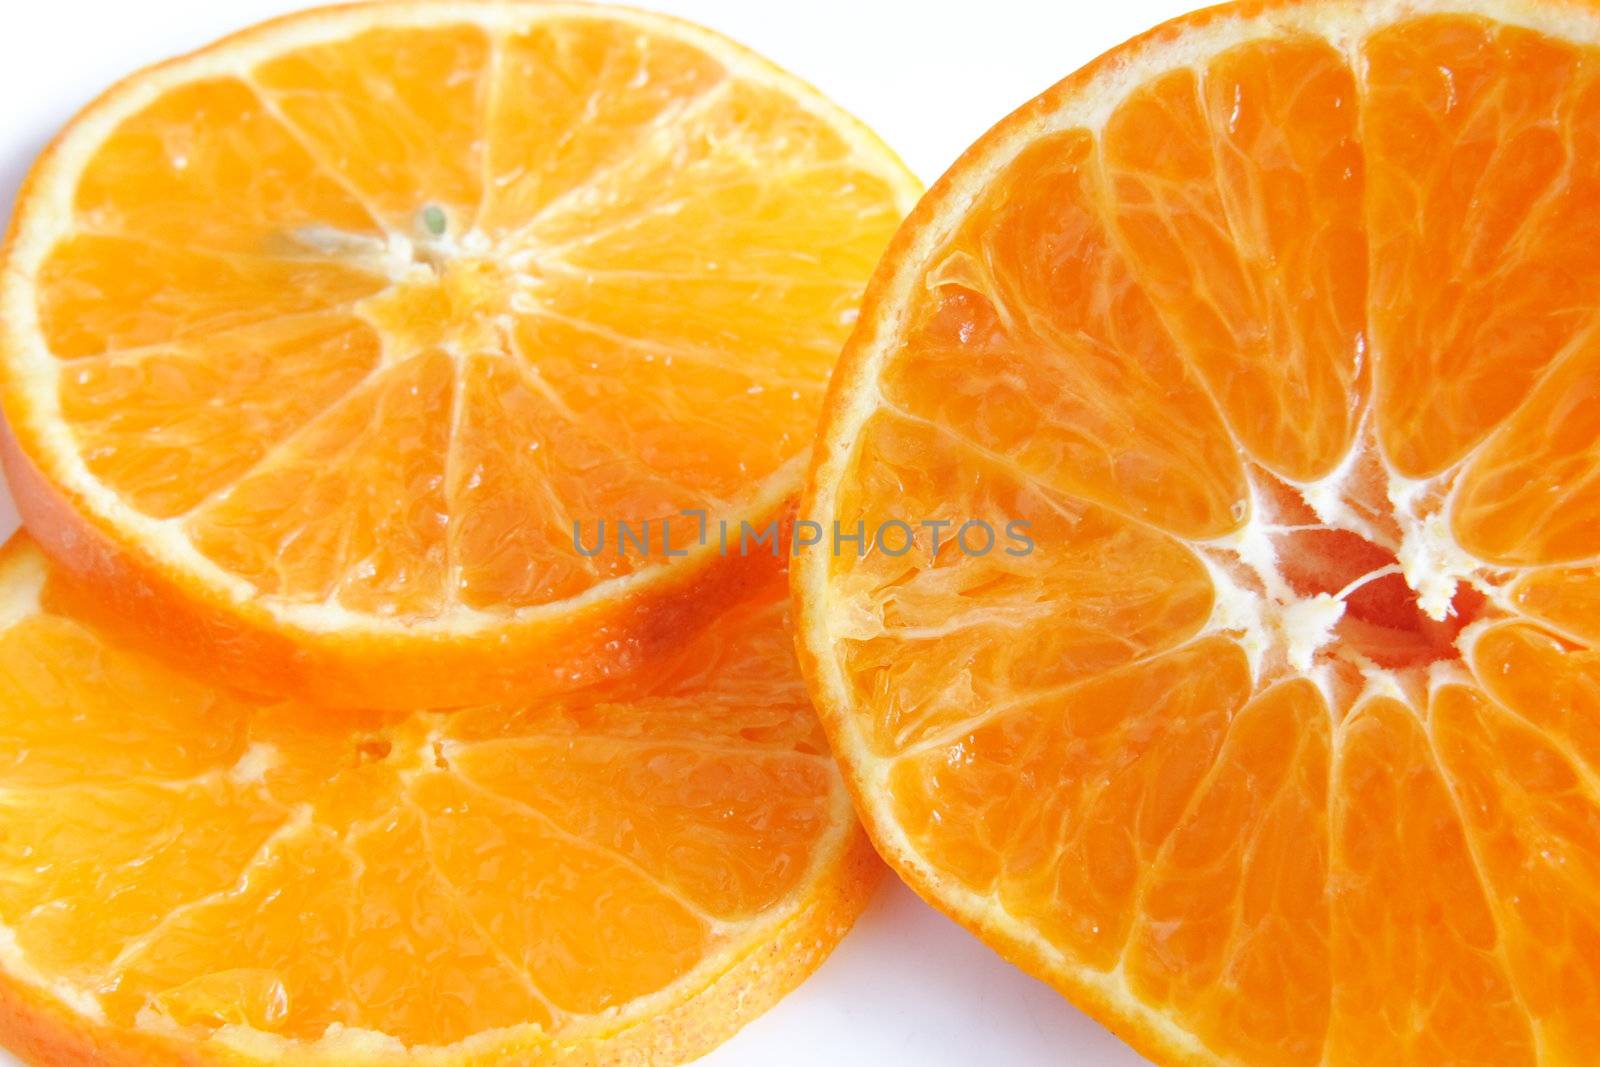 orange sliced and halved and put on a plate